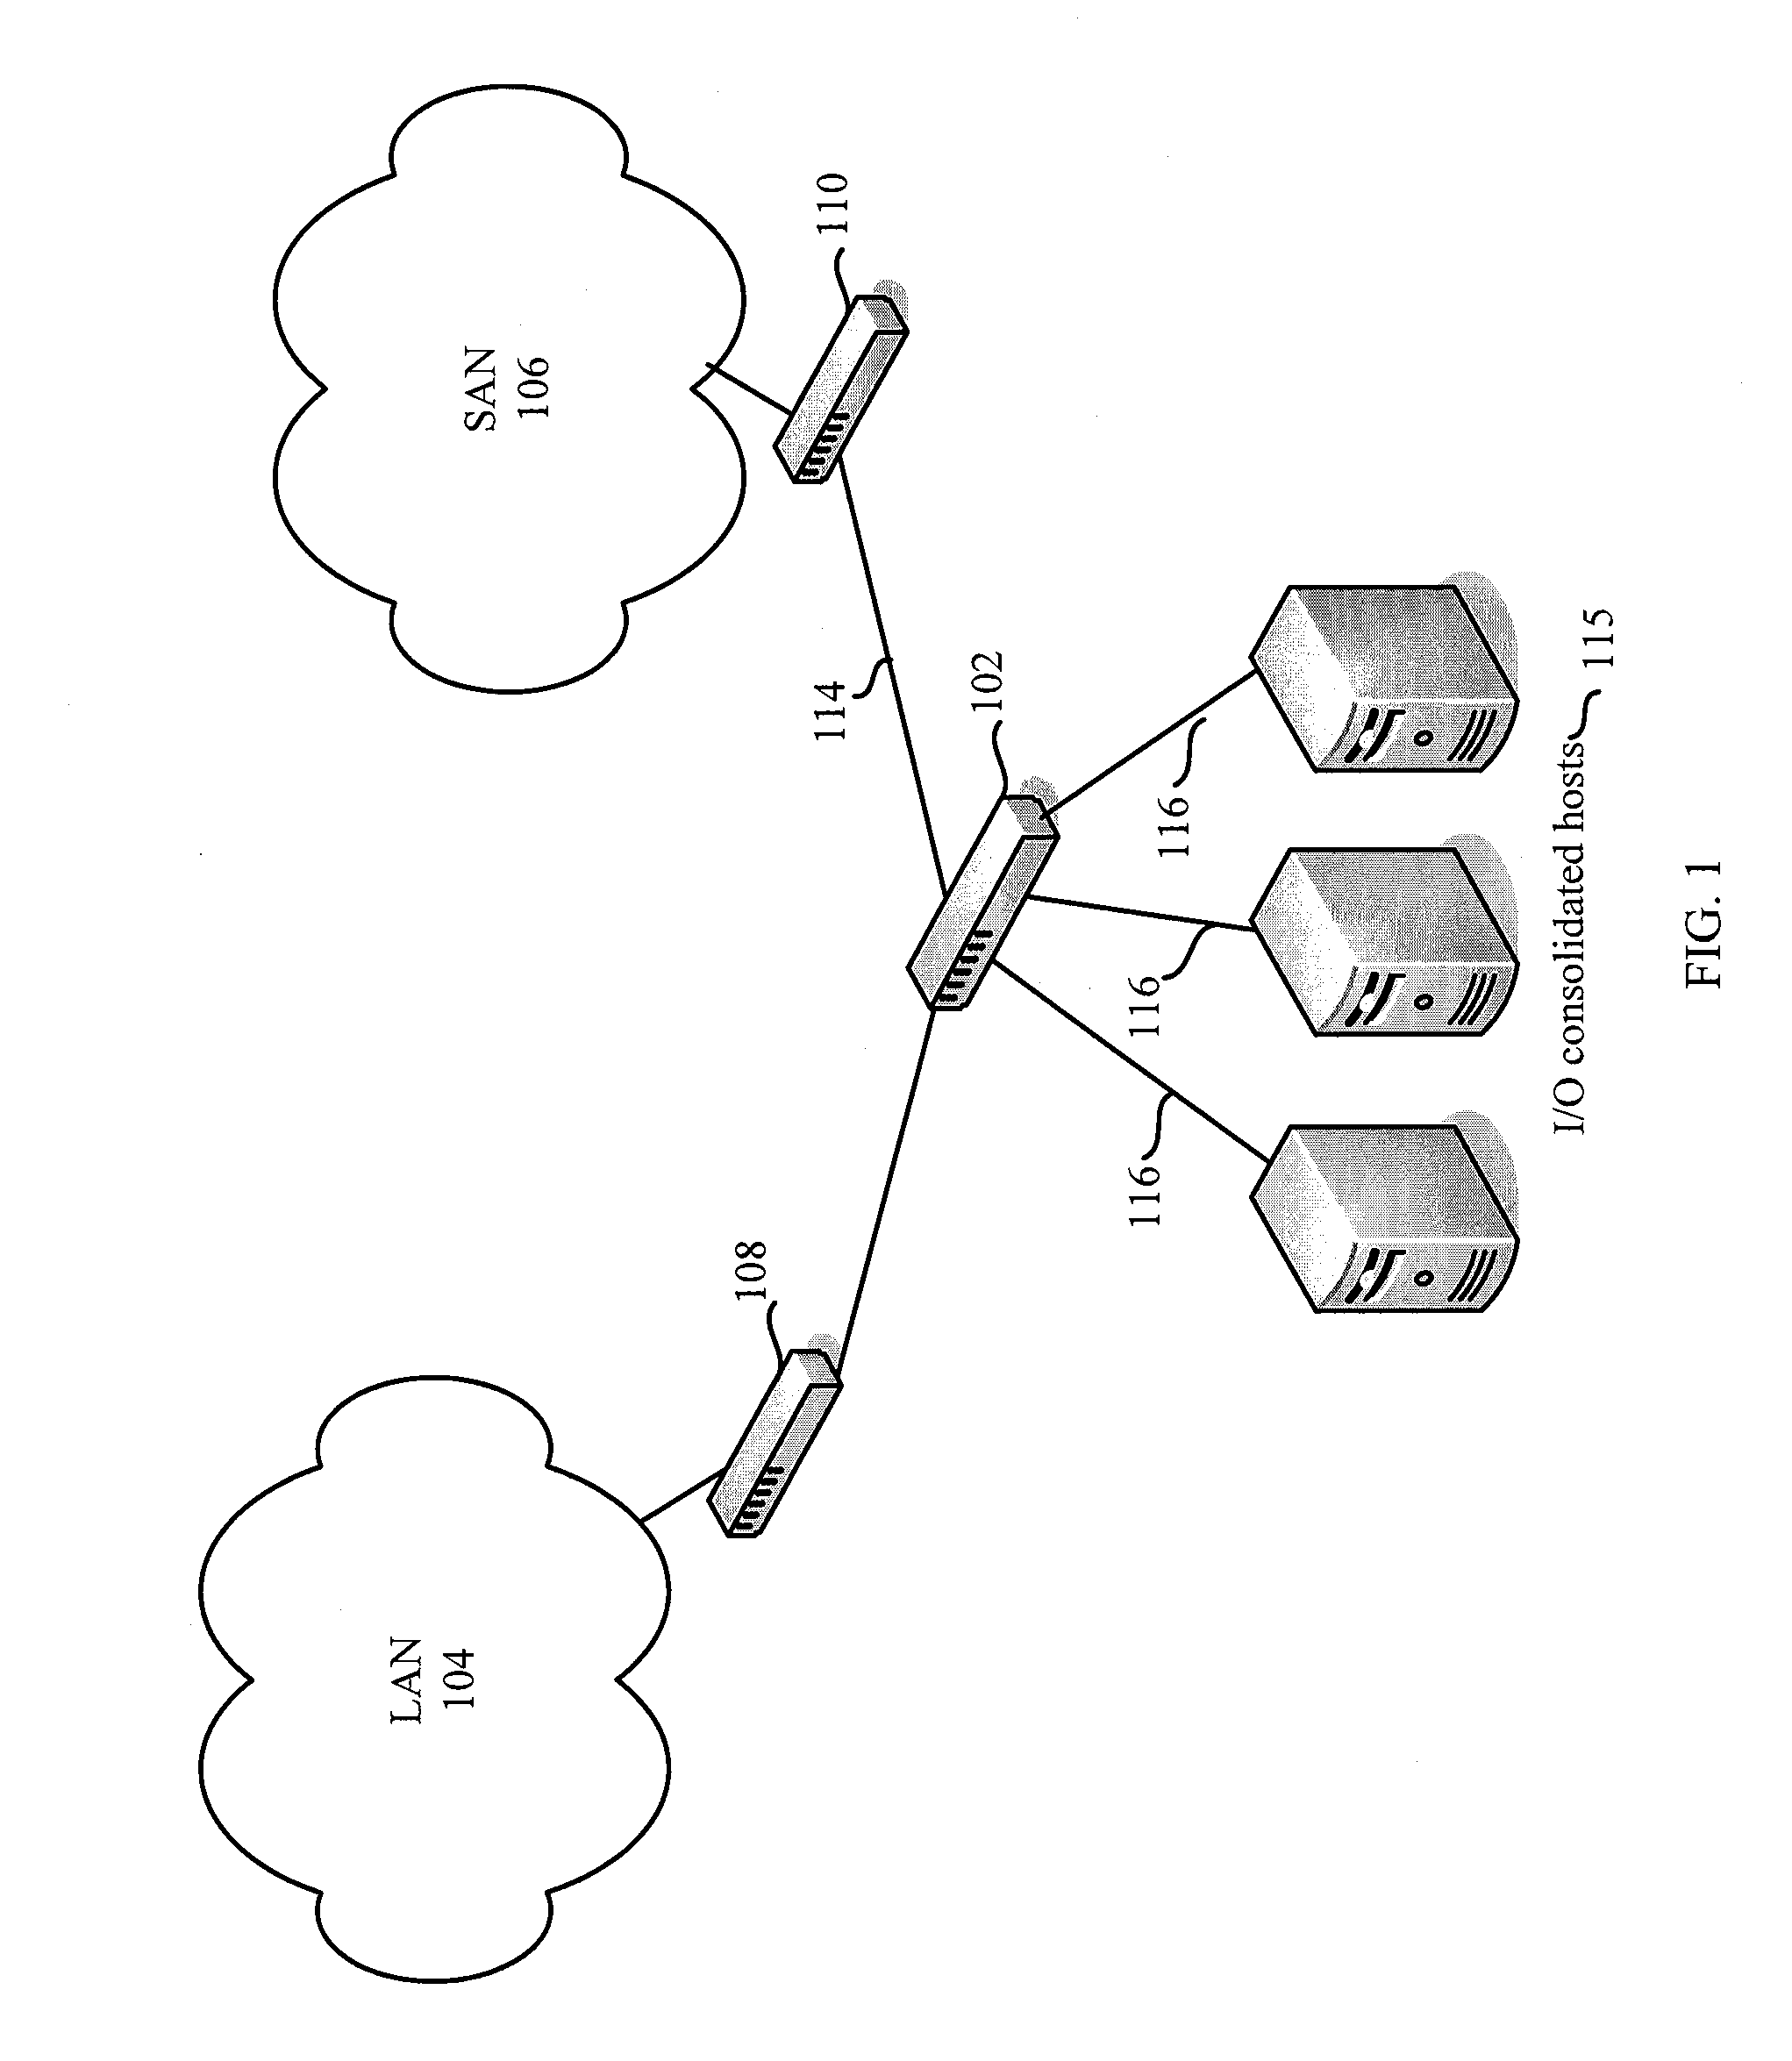 Method of selectively and seamlessly segregating san traffic in I/O consolidated networks